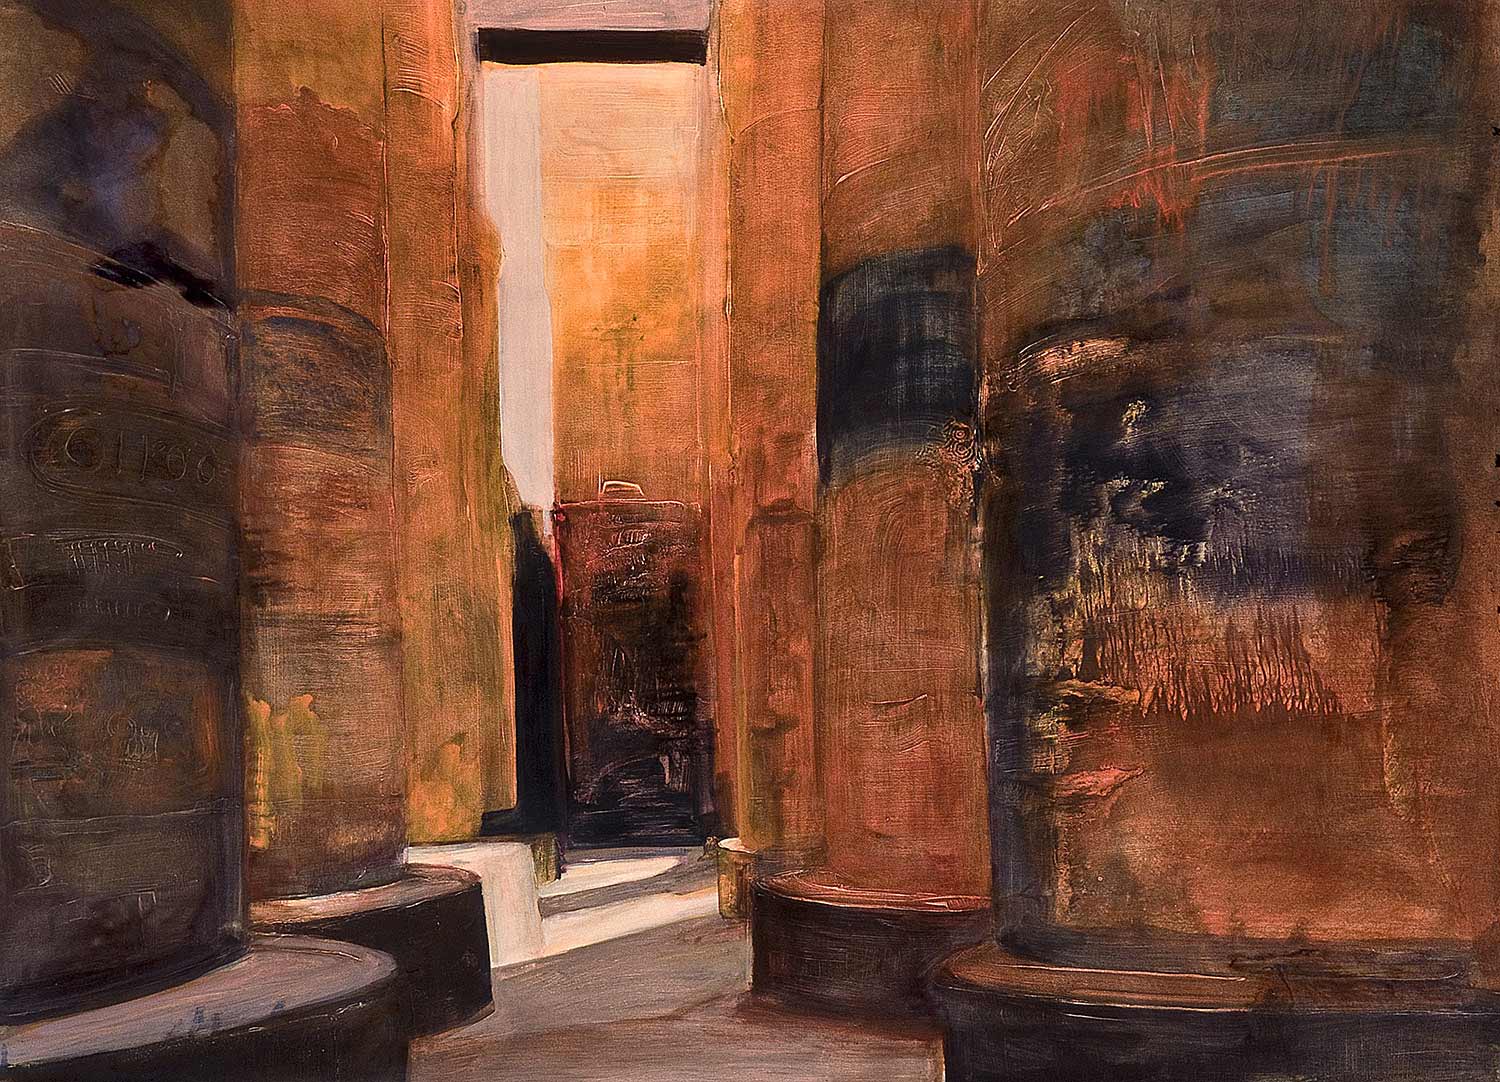 "The Great Hypostyle Hall",